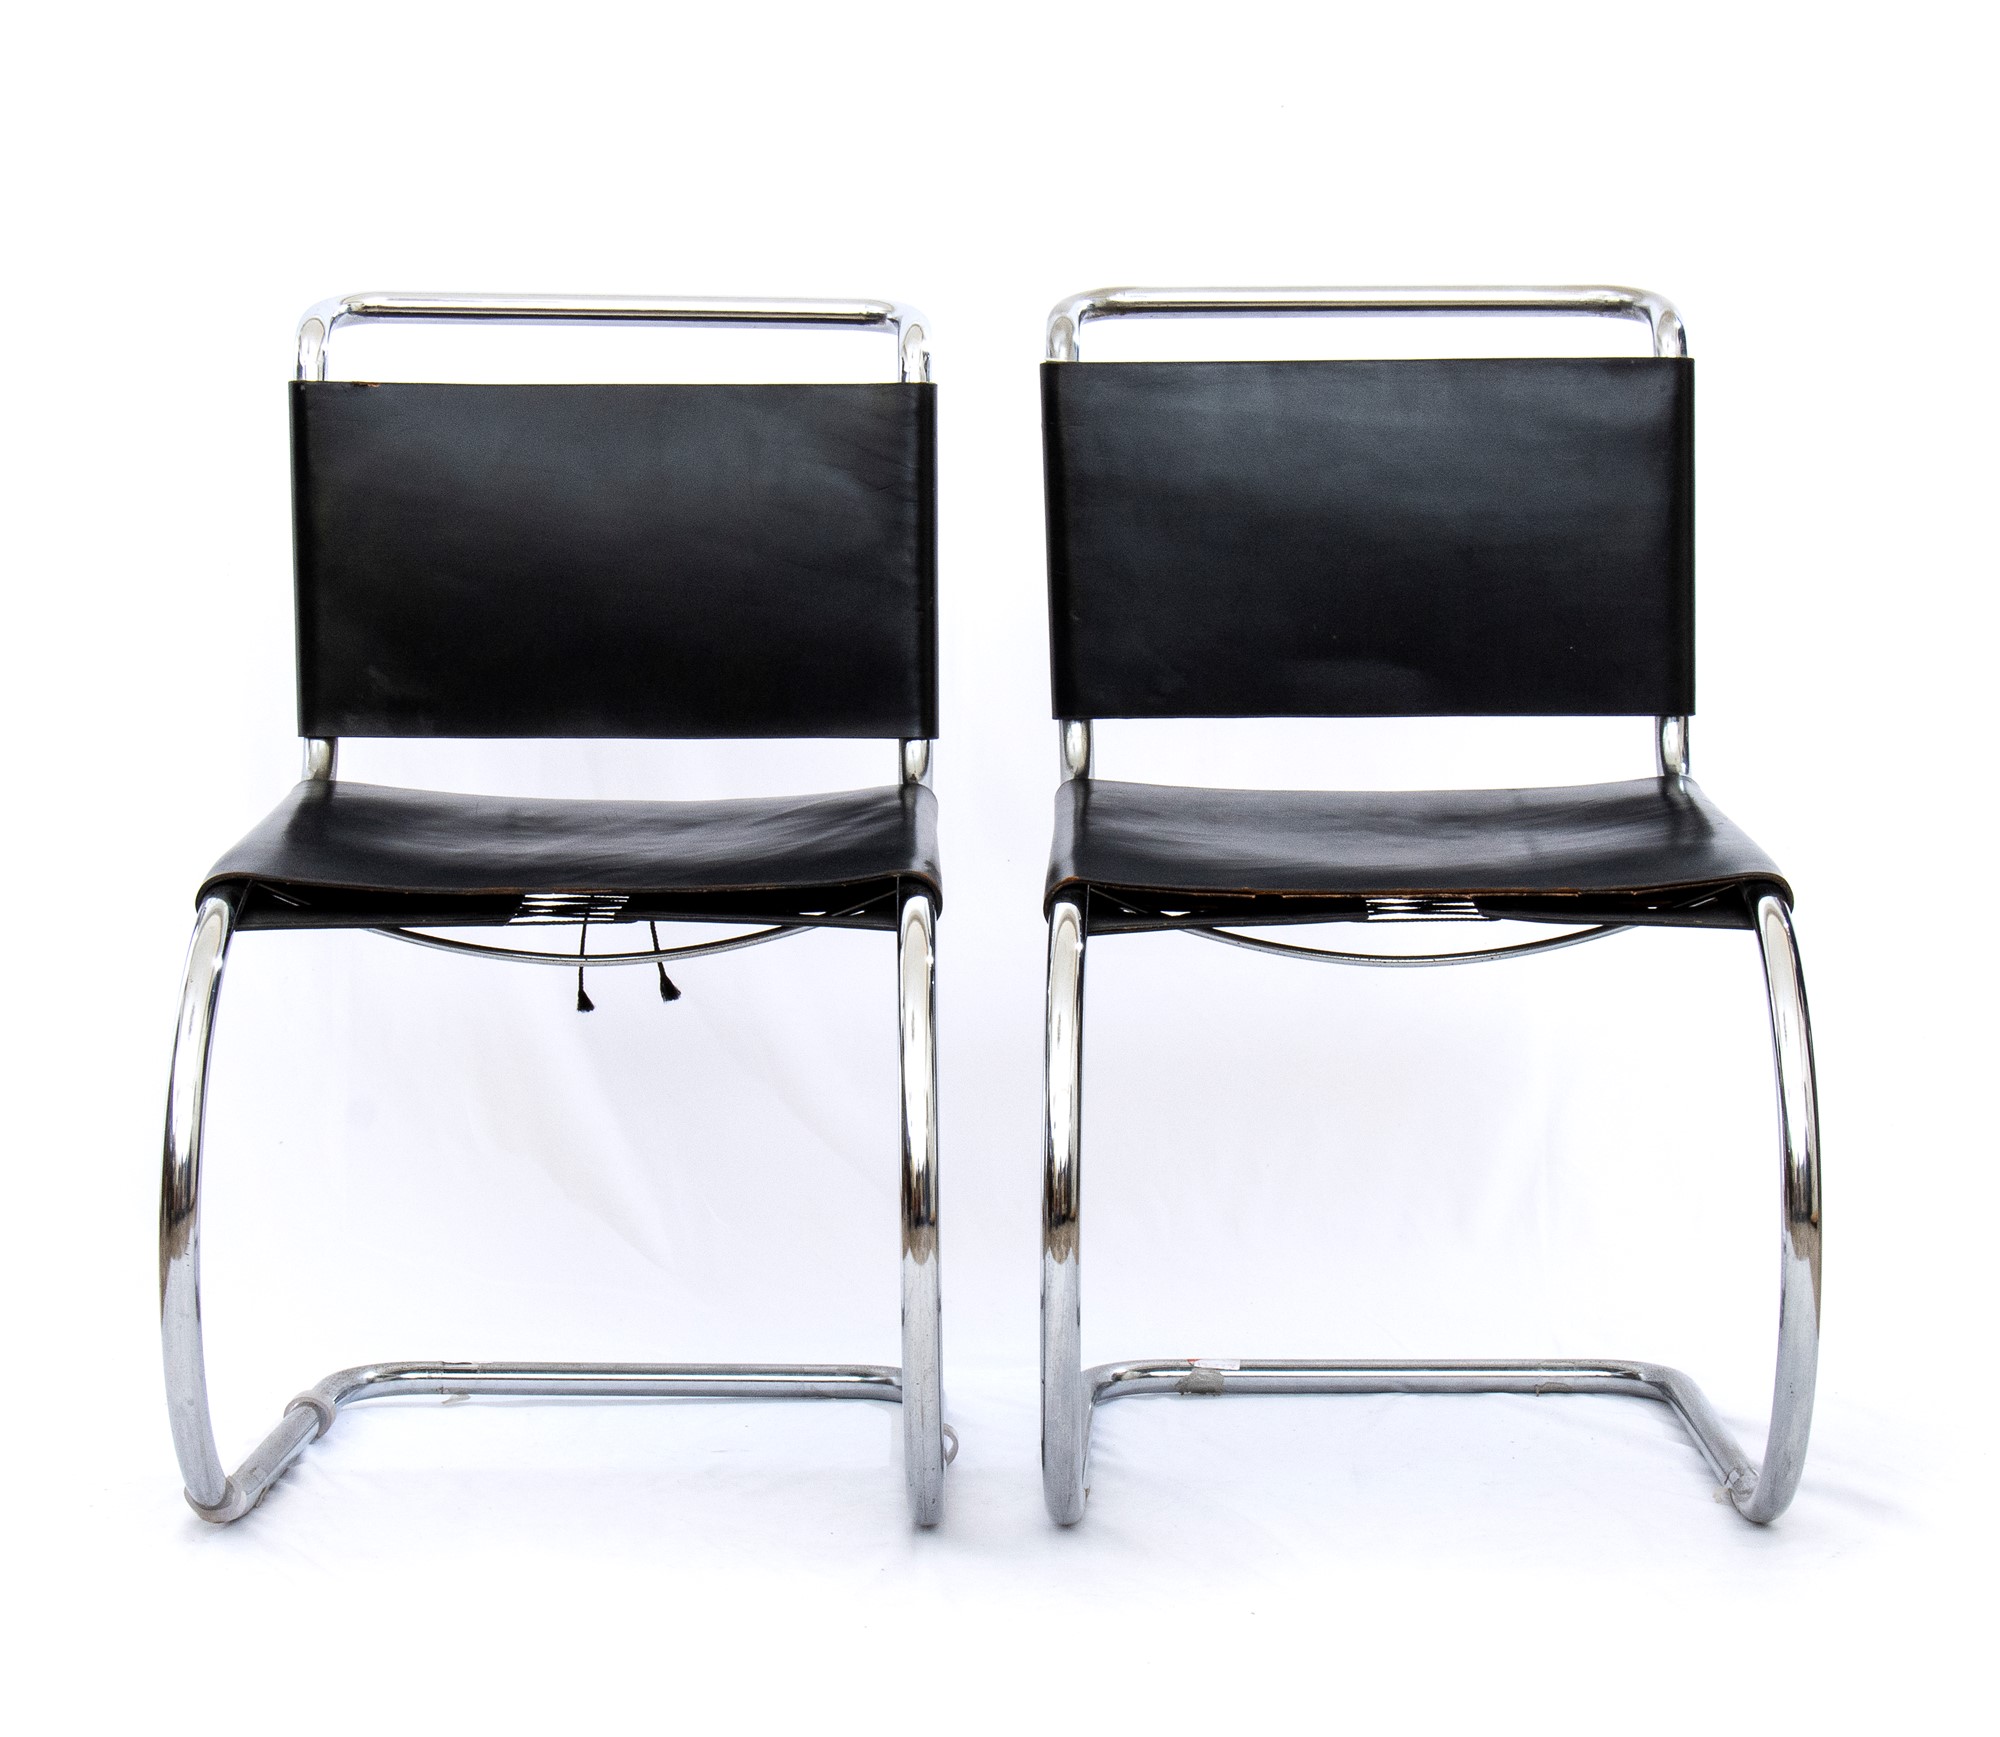 2 chairs in black leather and steel designed by Mart Stam and Marcer Beuer - Image 7 of 19